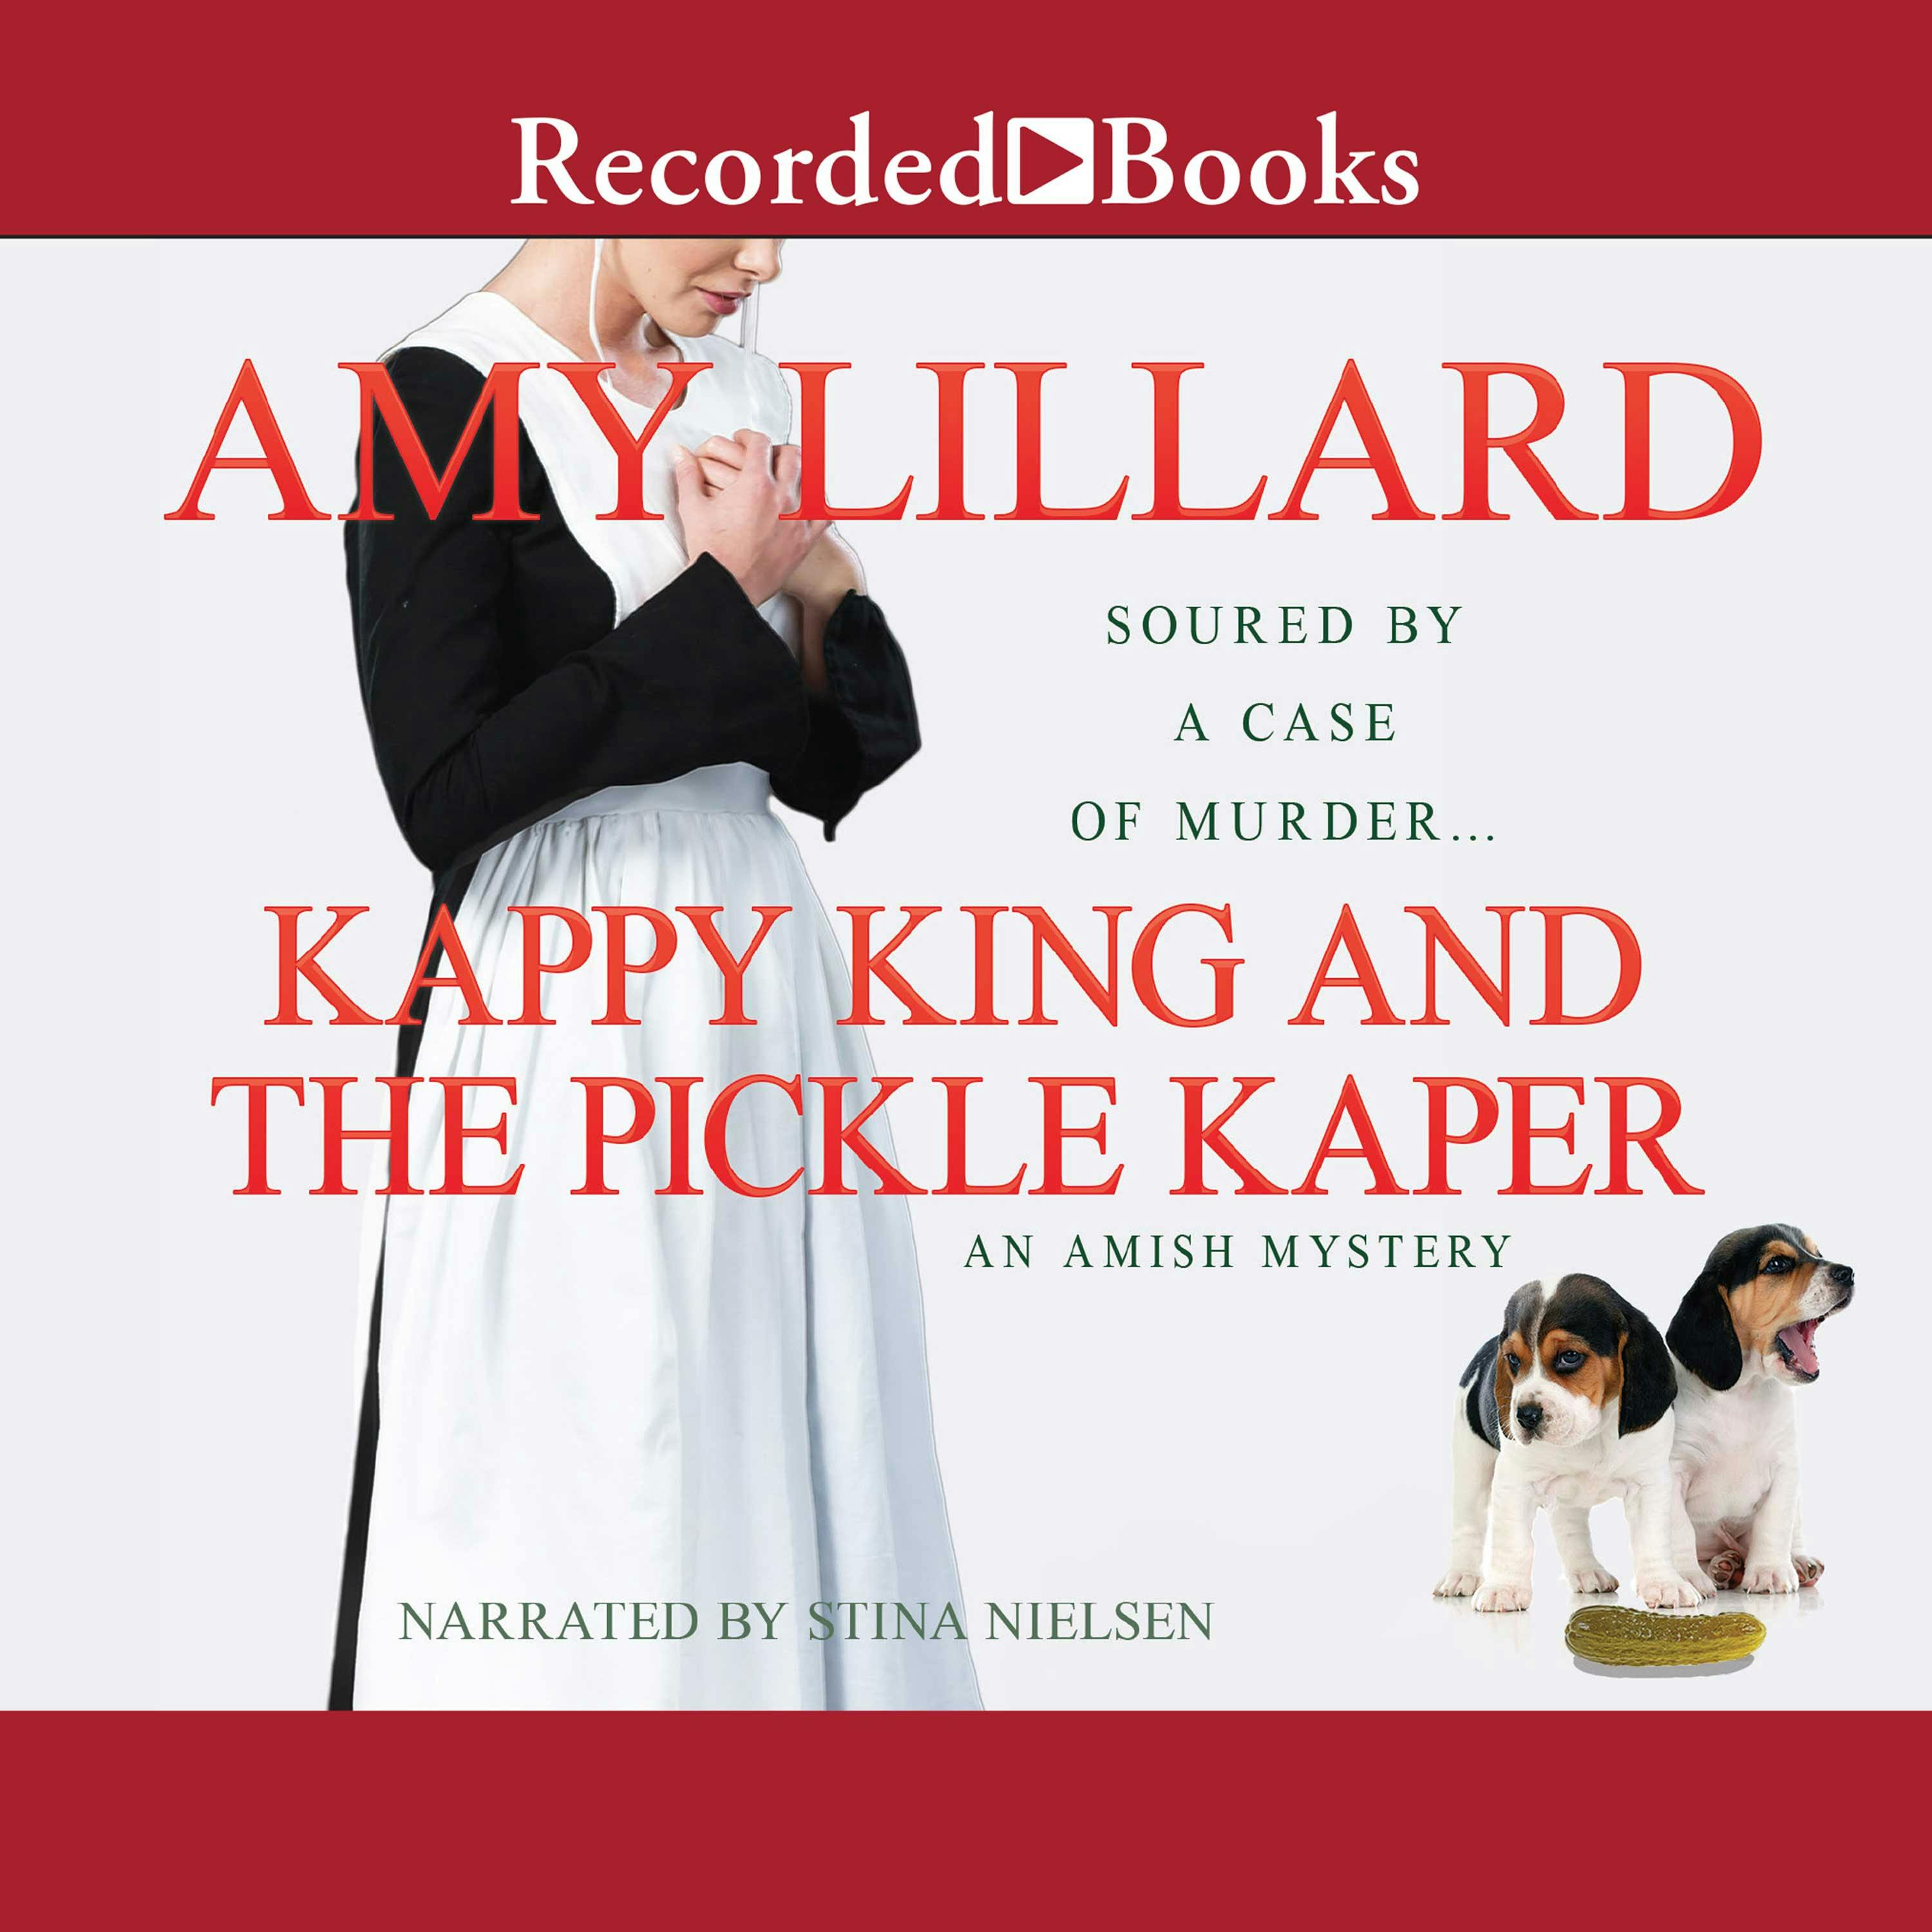 Kappy King and the Pickle Kaper: An Amish Mystery - Amy Lillard